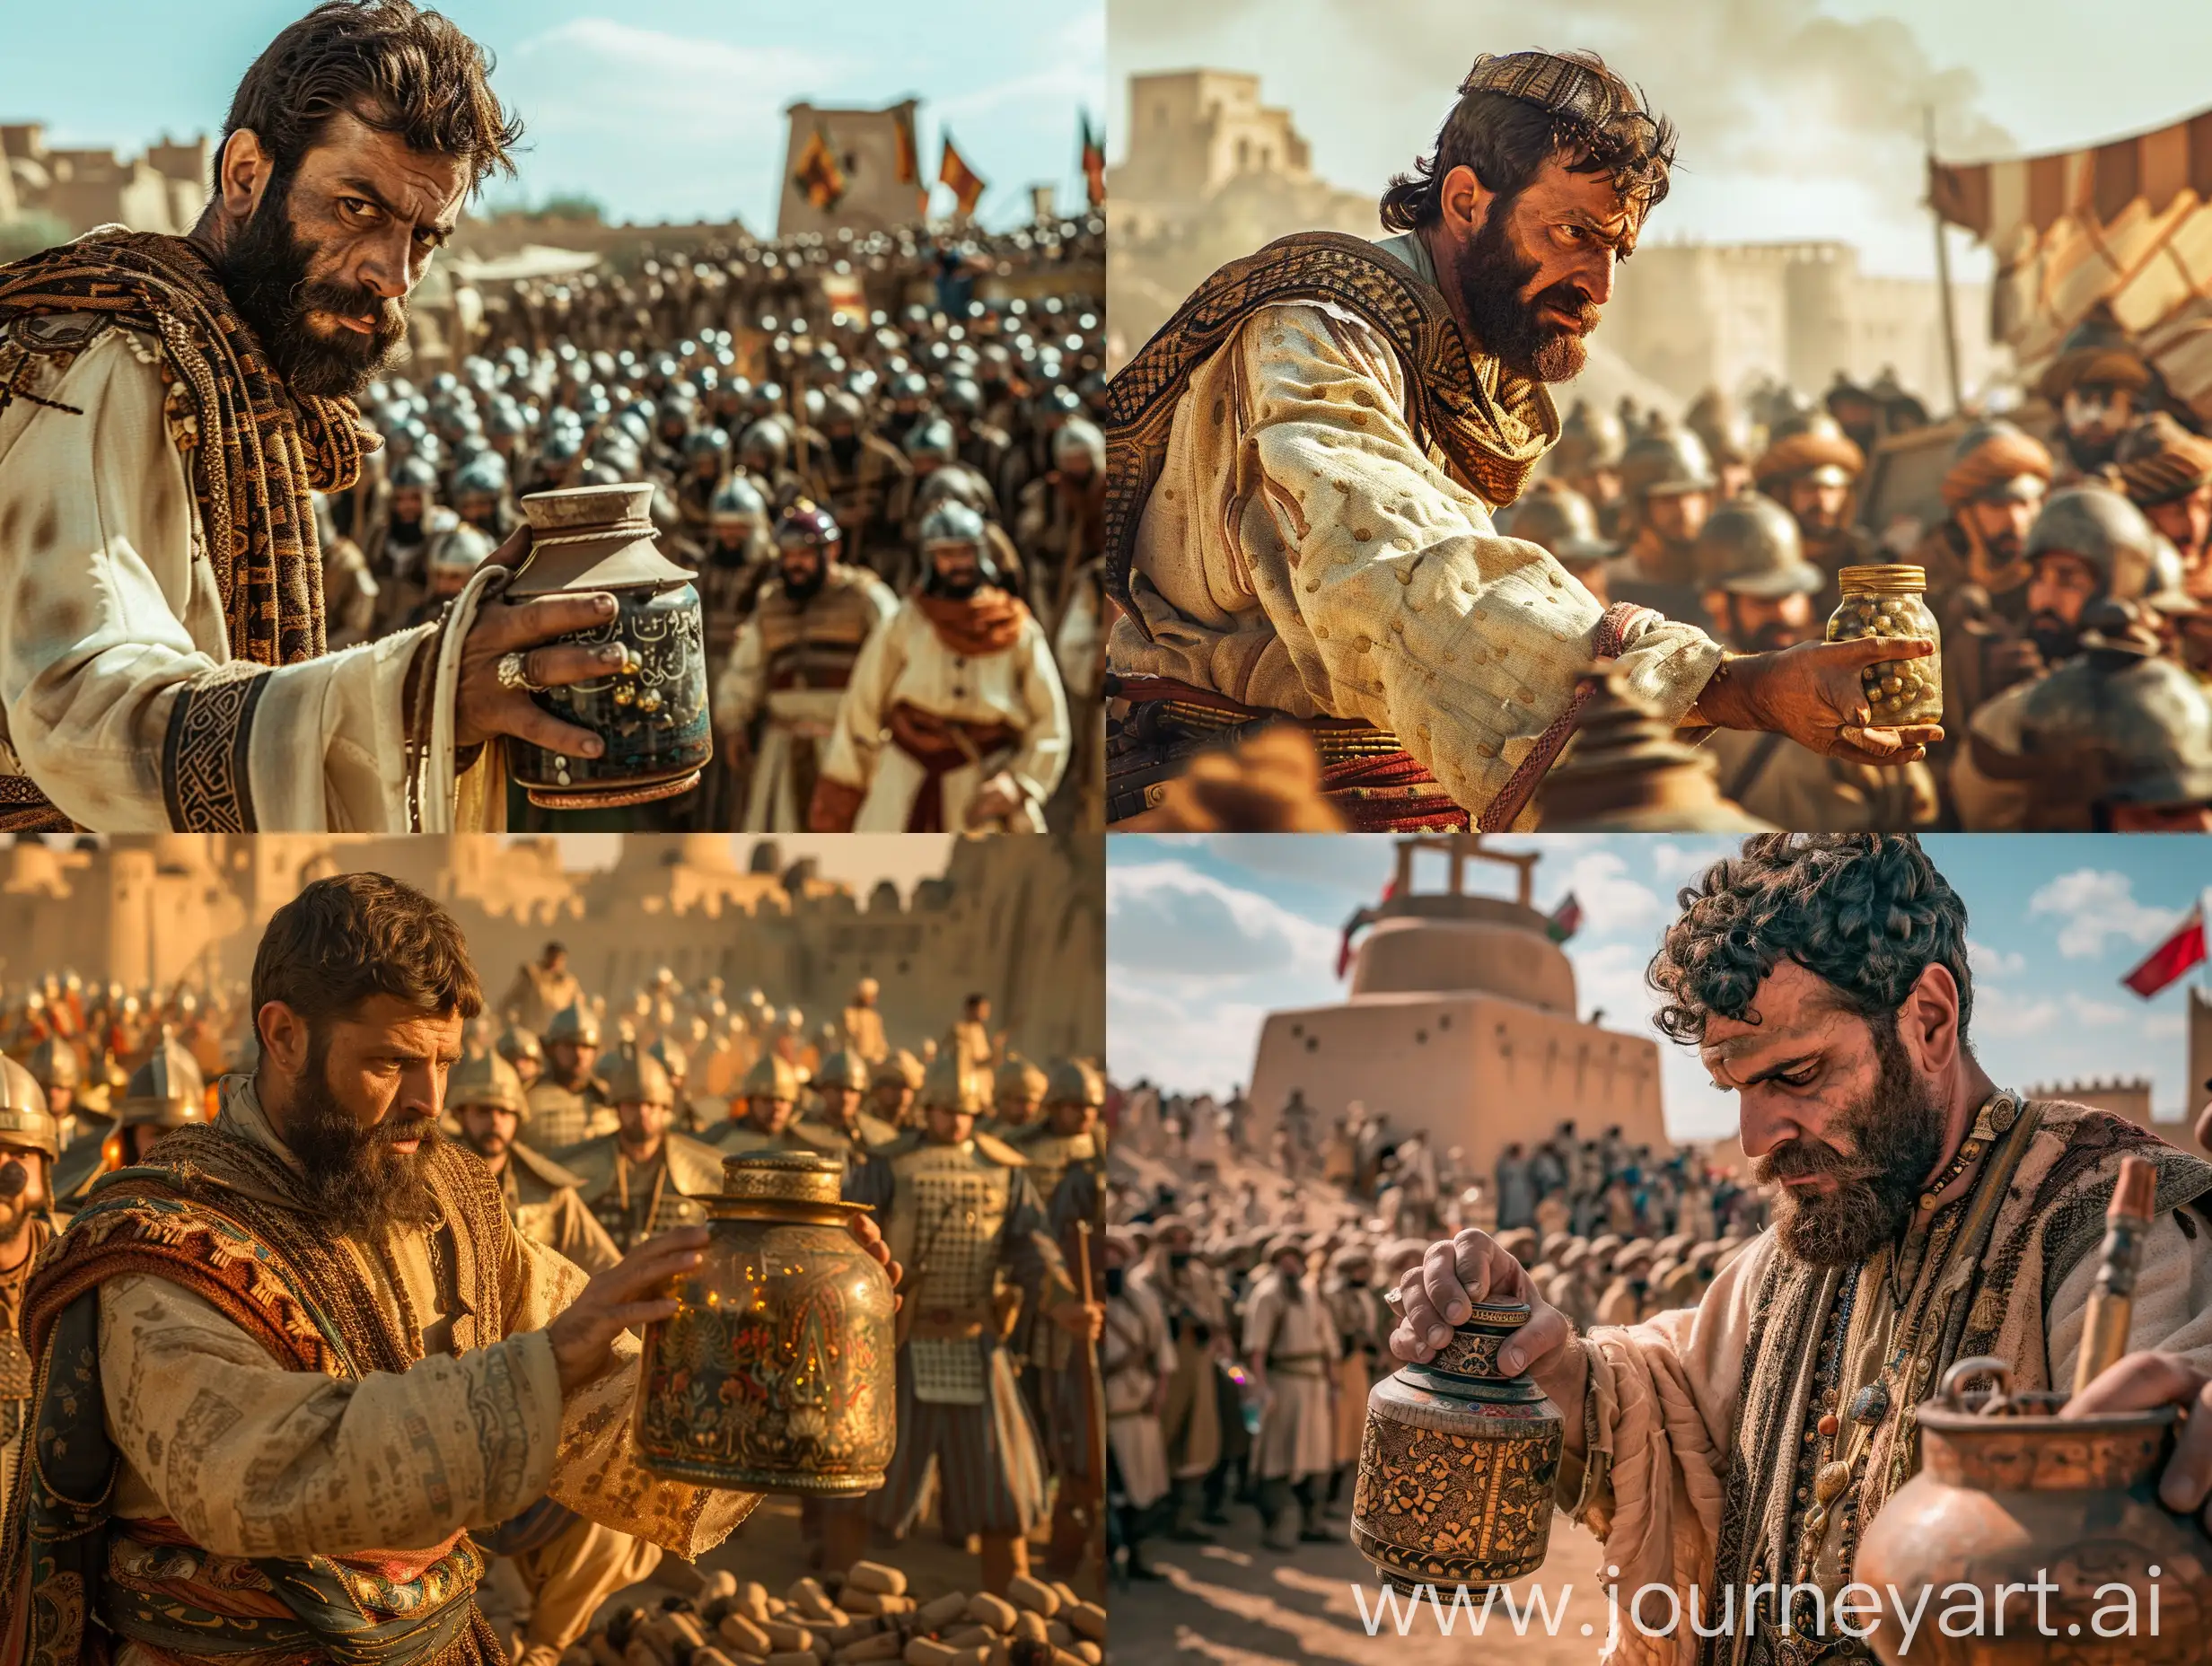 A 30-year-old Persian man in traditional Persian dress and a brown beard, with a jar of explosives in his hand, is slowly approaching from behind the army of Persian soldiers who are in traditional and ancient dress around the Bam Citadel in the Persian Empire. , create a real quality photo for me with fine details and midday sun lighting